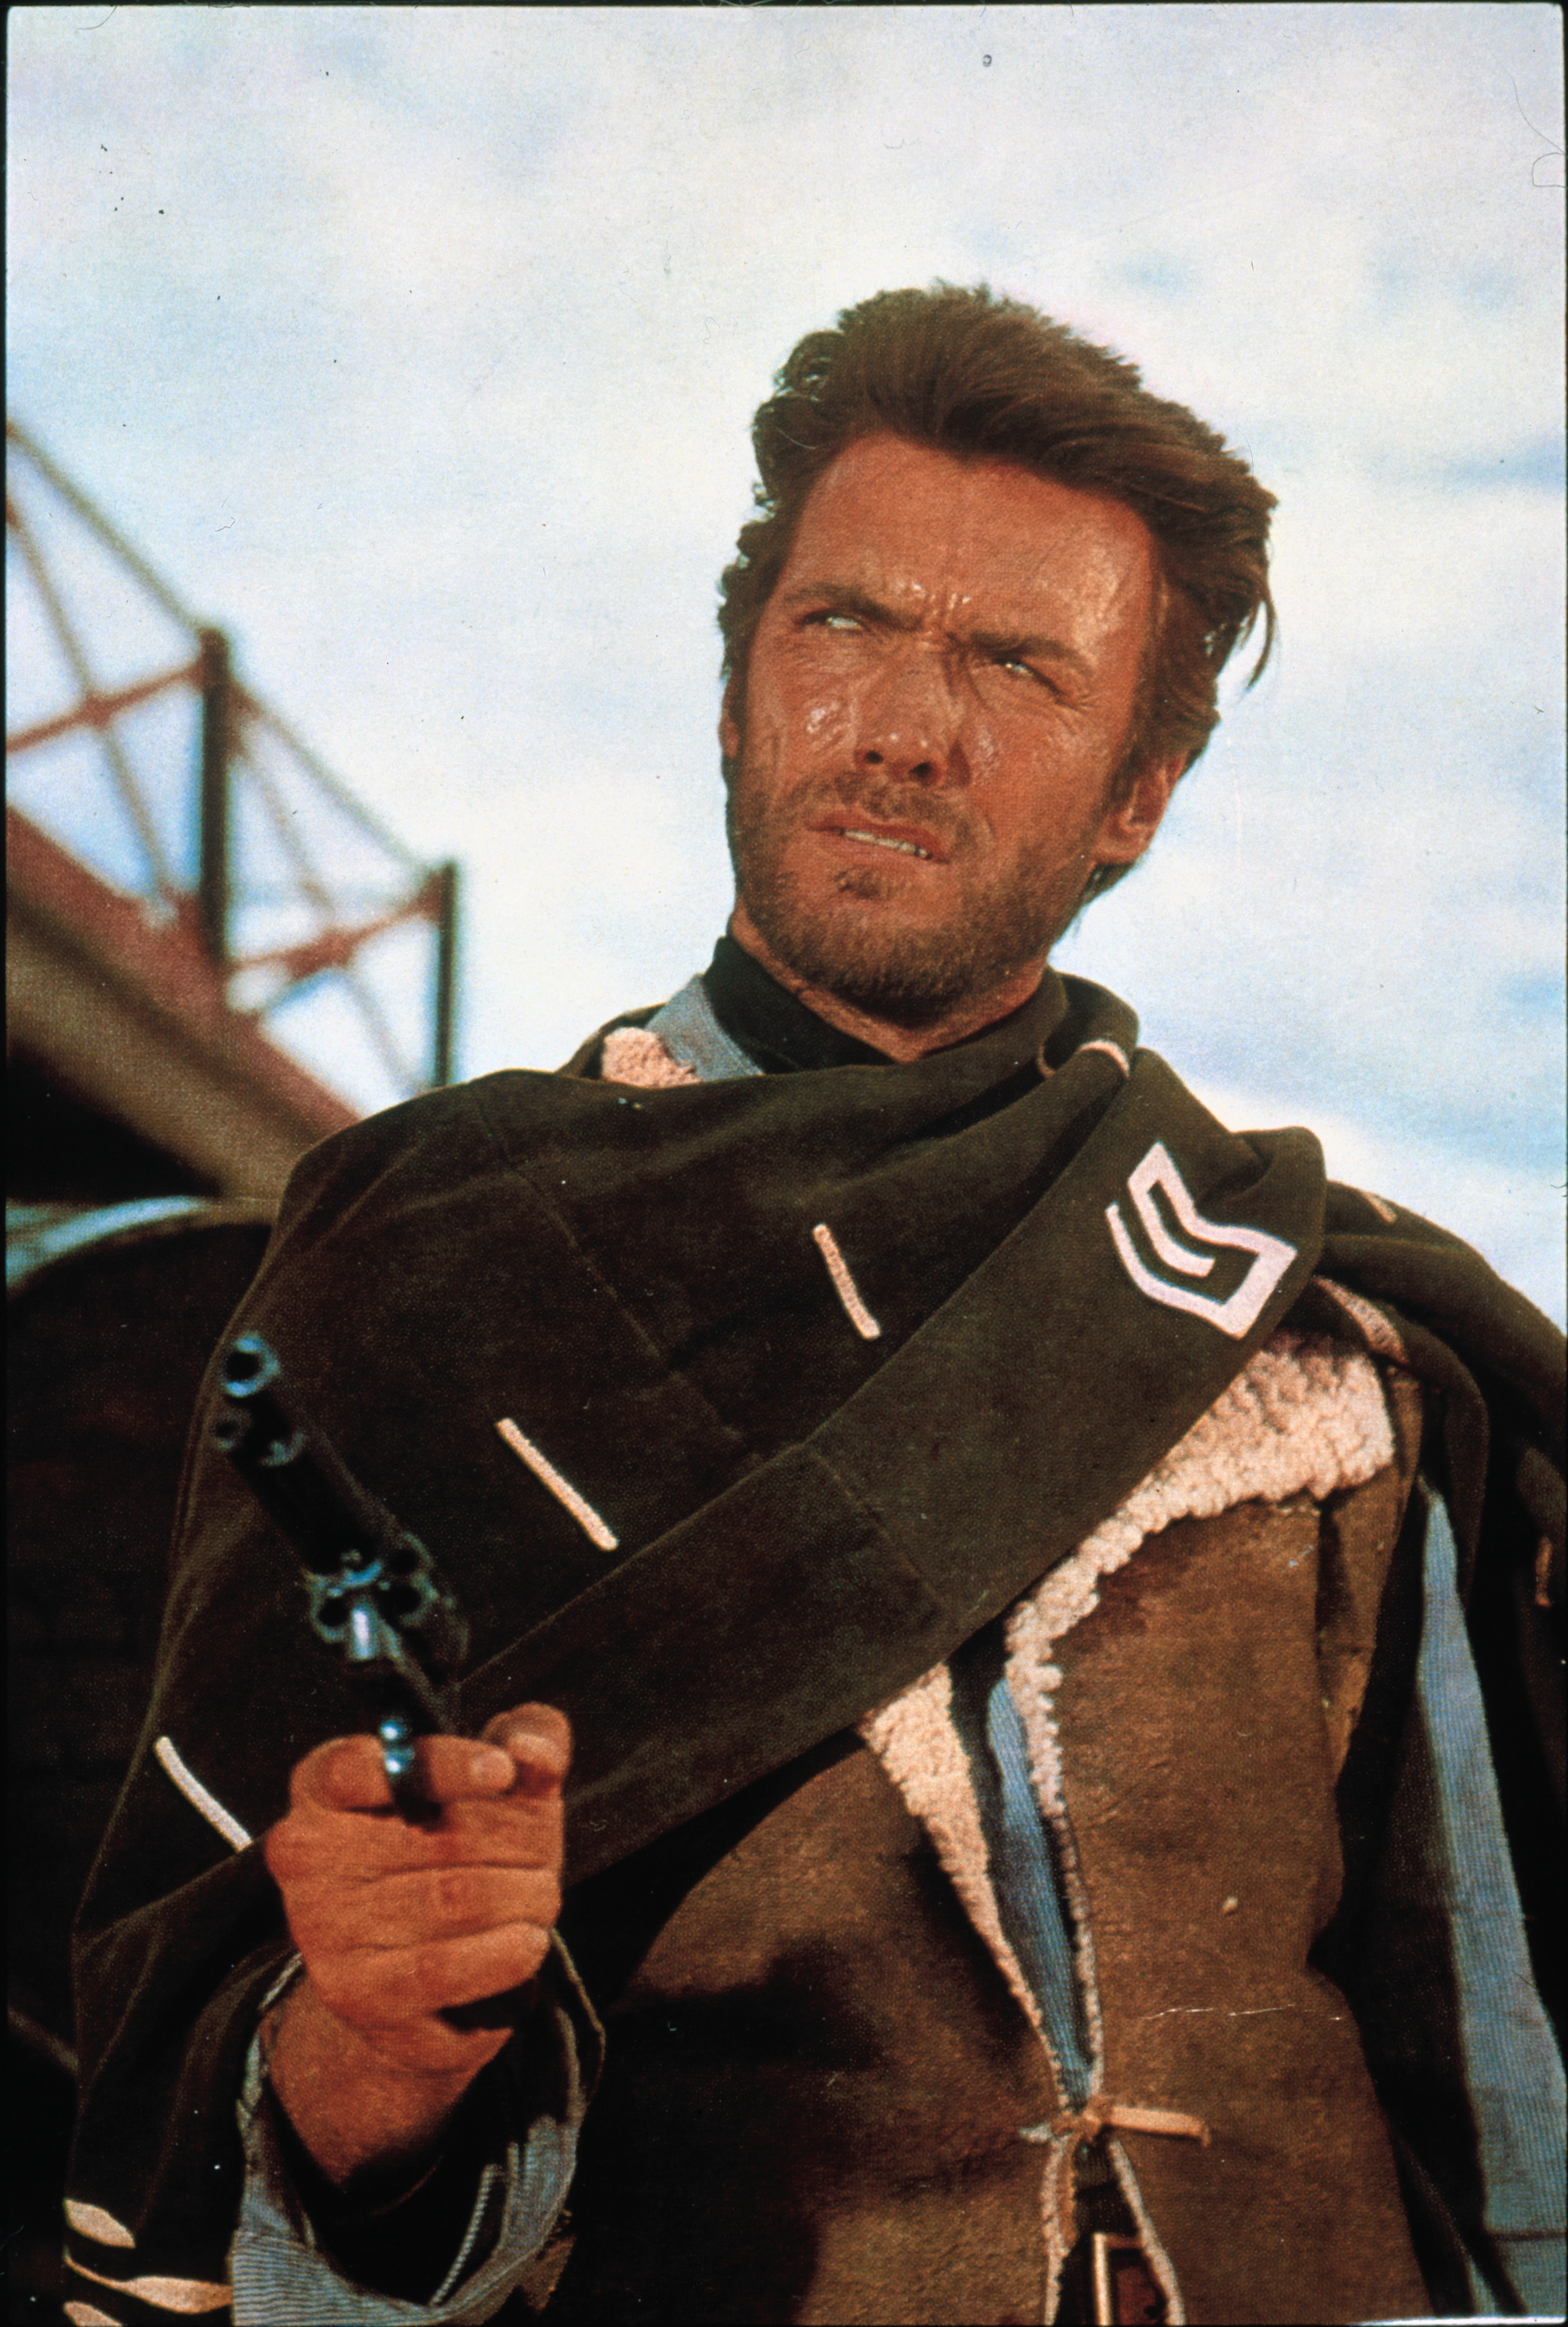 Clint Eastwood in ‘A Fistful of Dollars’